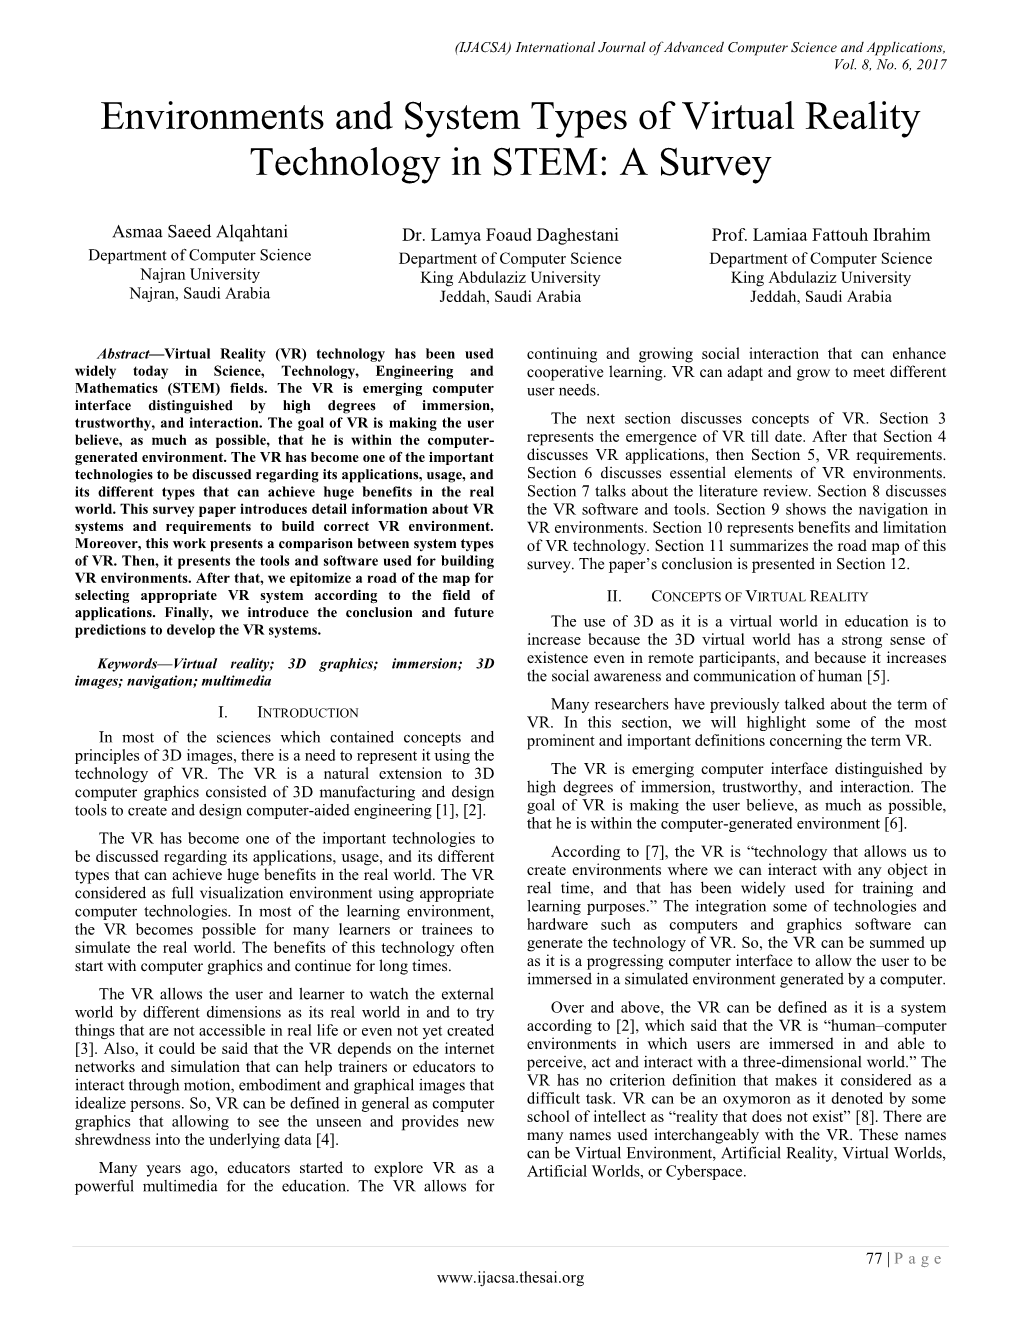 Environments and System Types of Virtual Reality Technology in STEM: a Survey